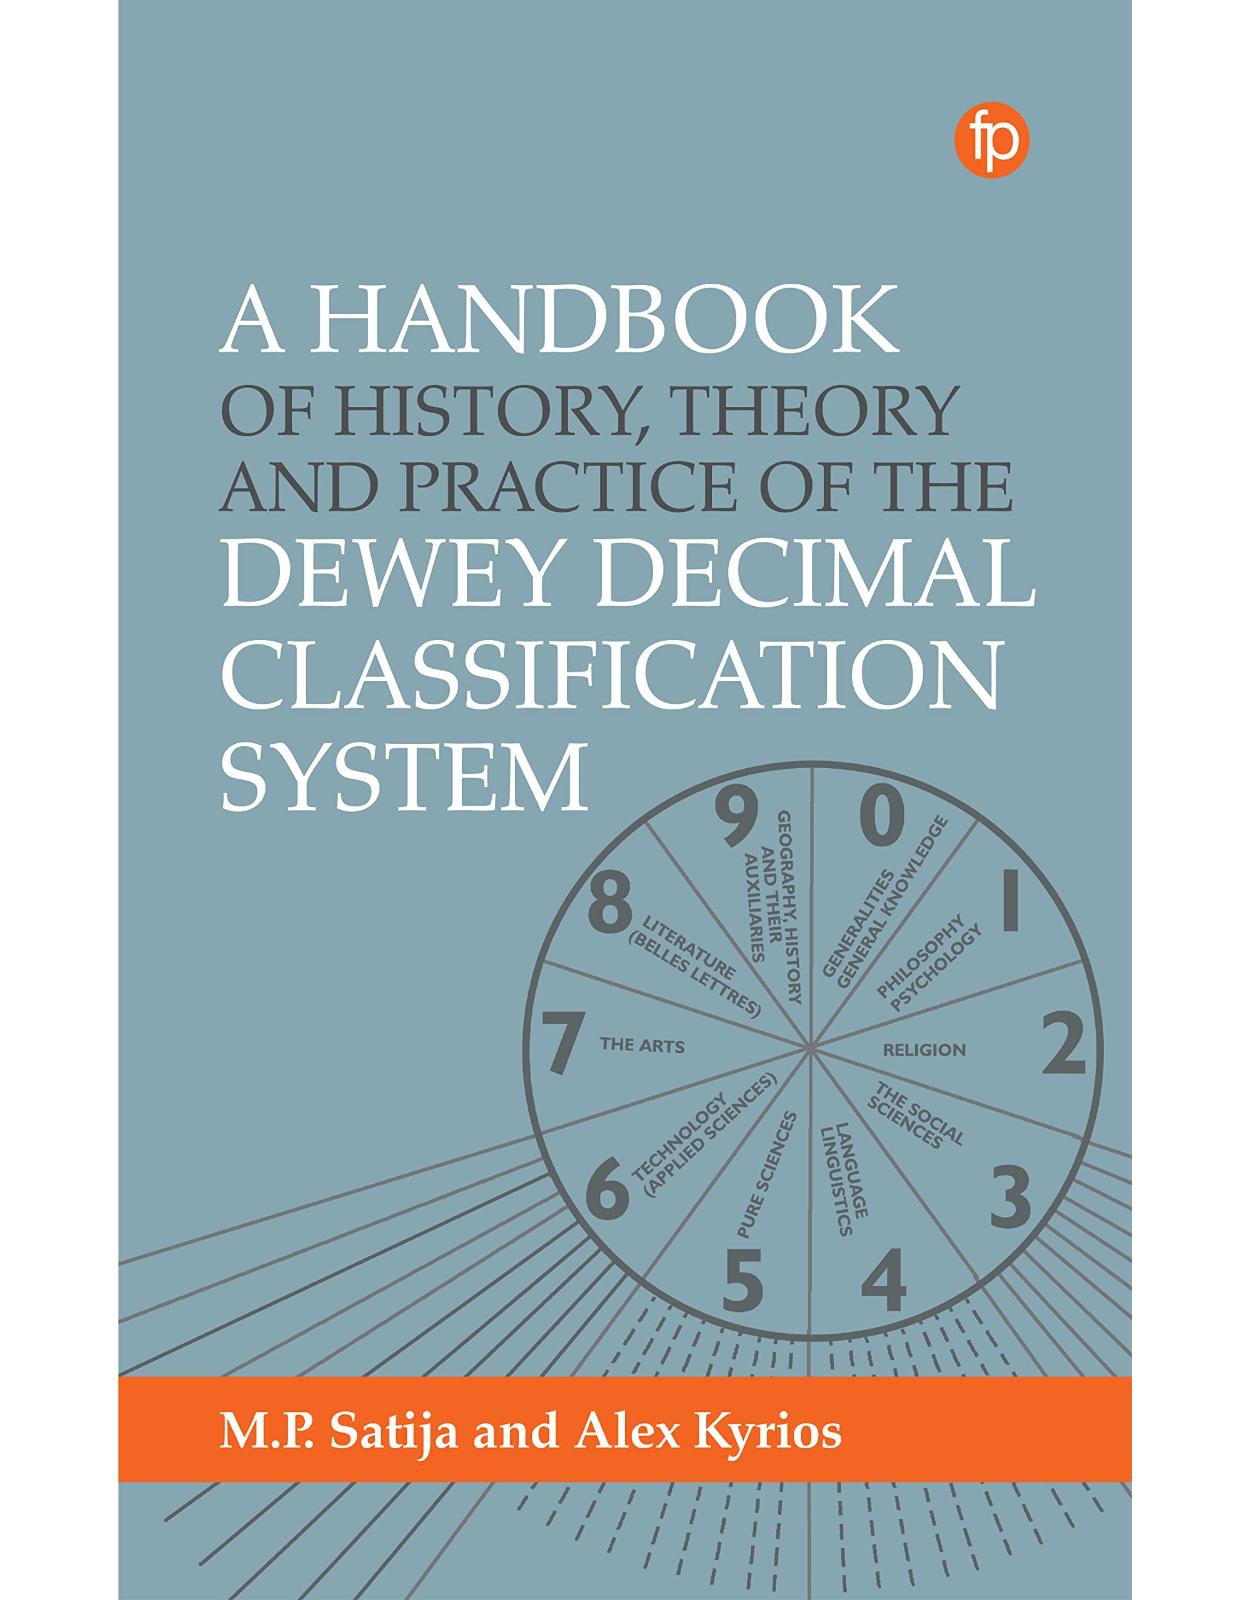 Handbook of History, Theory and Practice of the Dewey Decimal Classification System